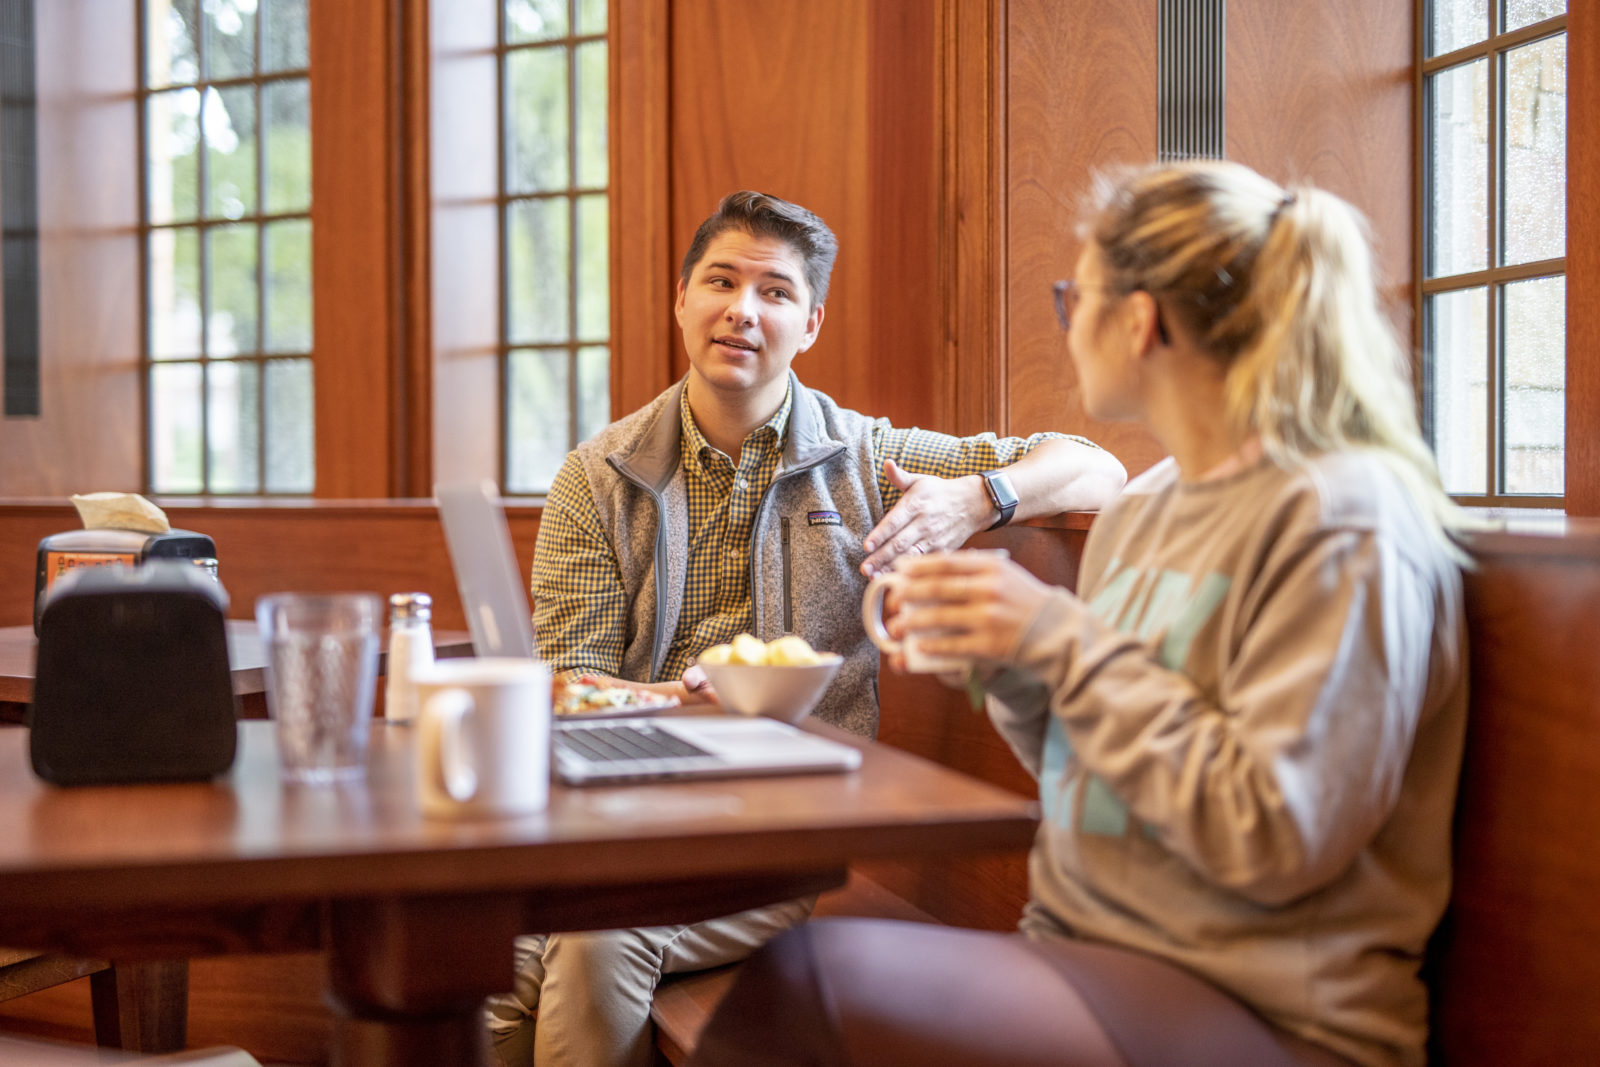 Danny Coradazzi meets with students in the dining room of E. Bronson Ingram College.